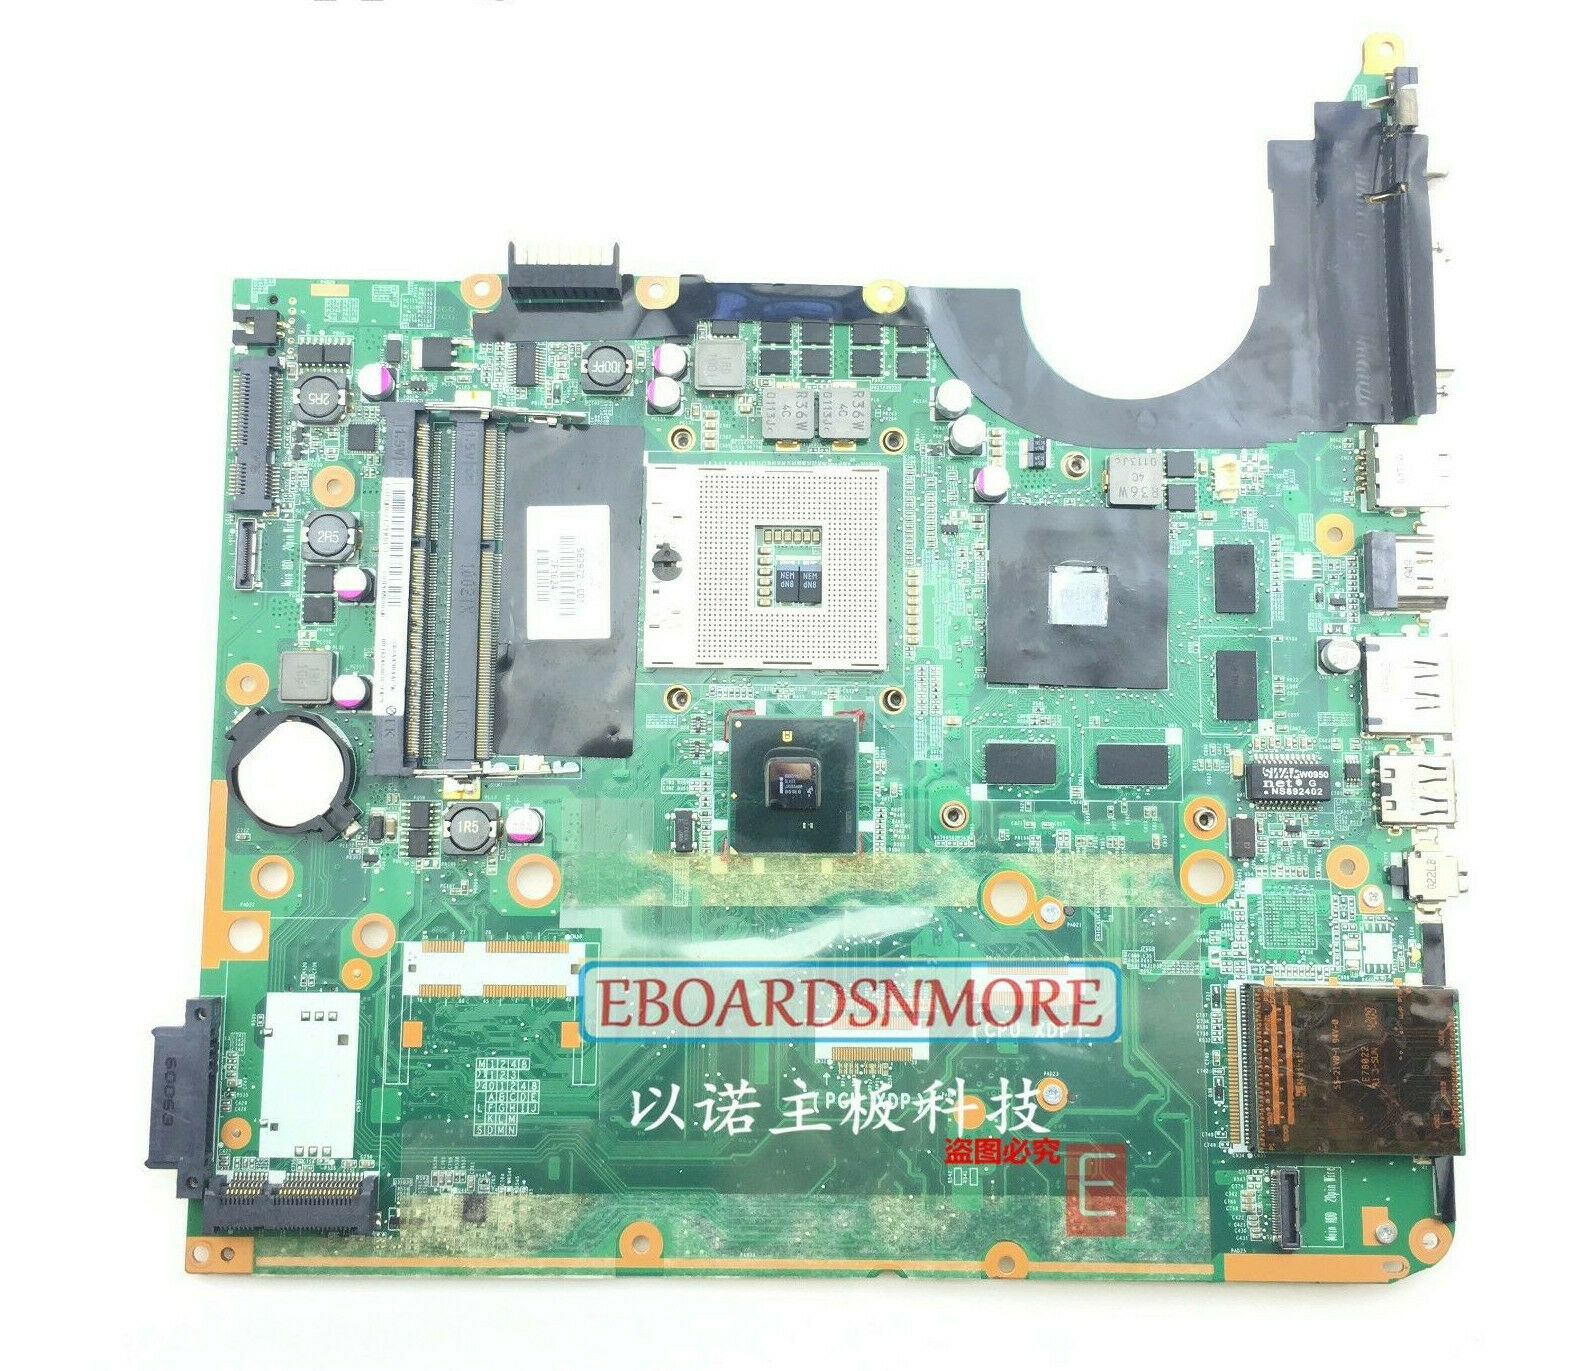 580972-001 Motherboard for HP DV7 DV7-3000 Laptop, DA0UP6MB6E0,1GB video, for i7 Compatible CPU Brand: Inte